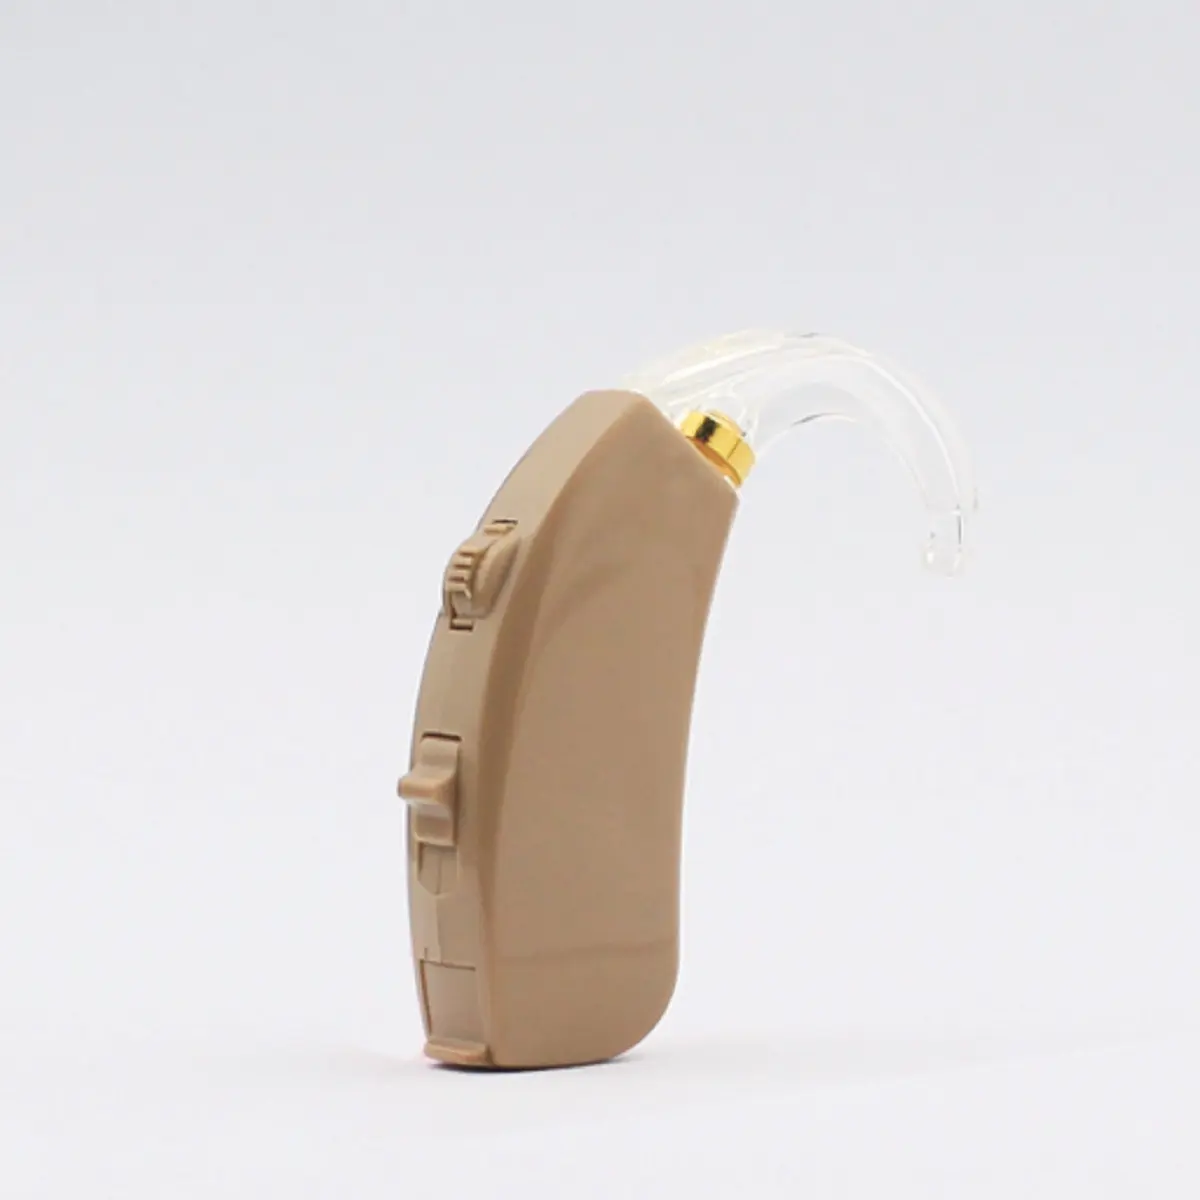 Popular Online Sales Products Sound Amplifier Best Amazing Price Ever Quality Analog Hearing Aid